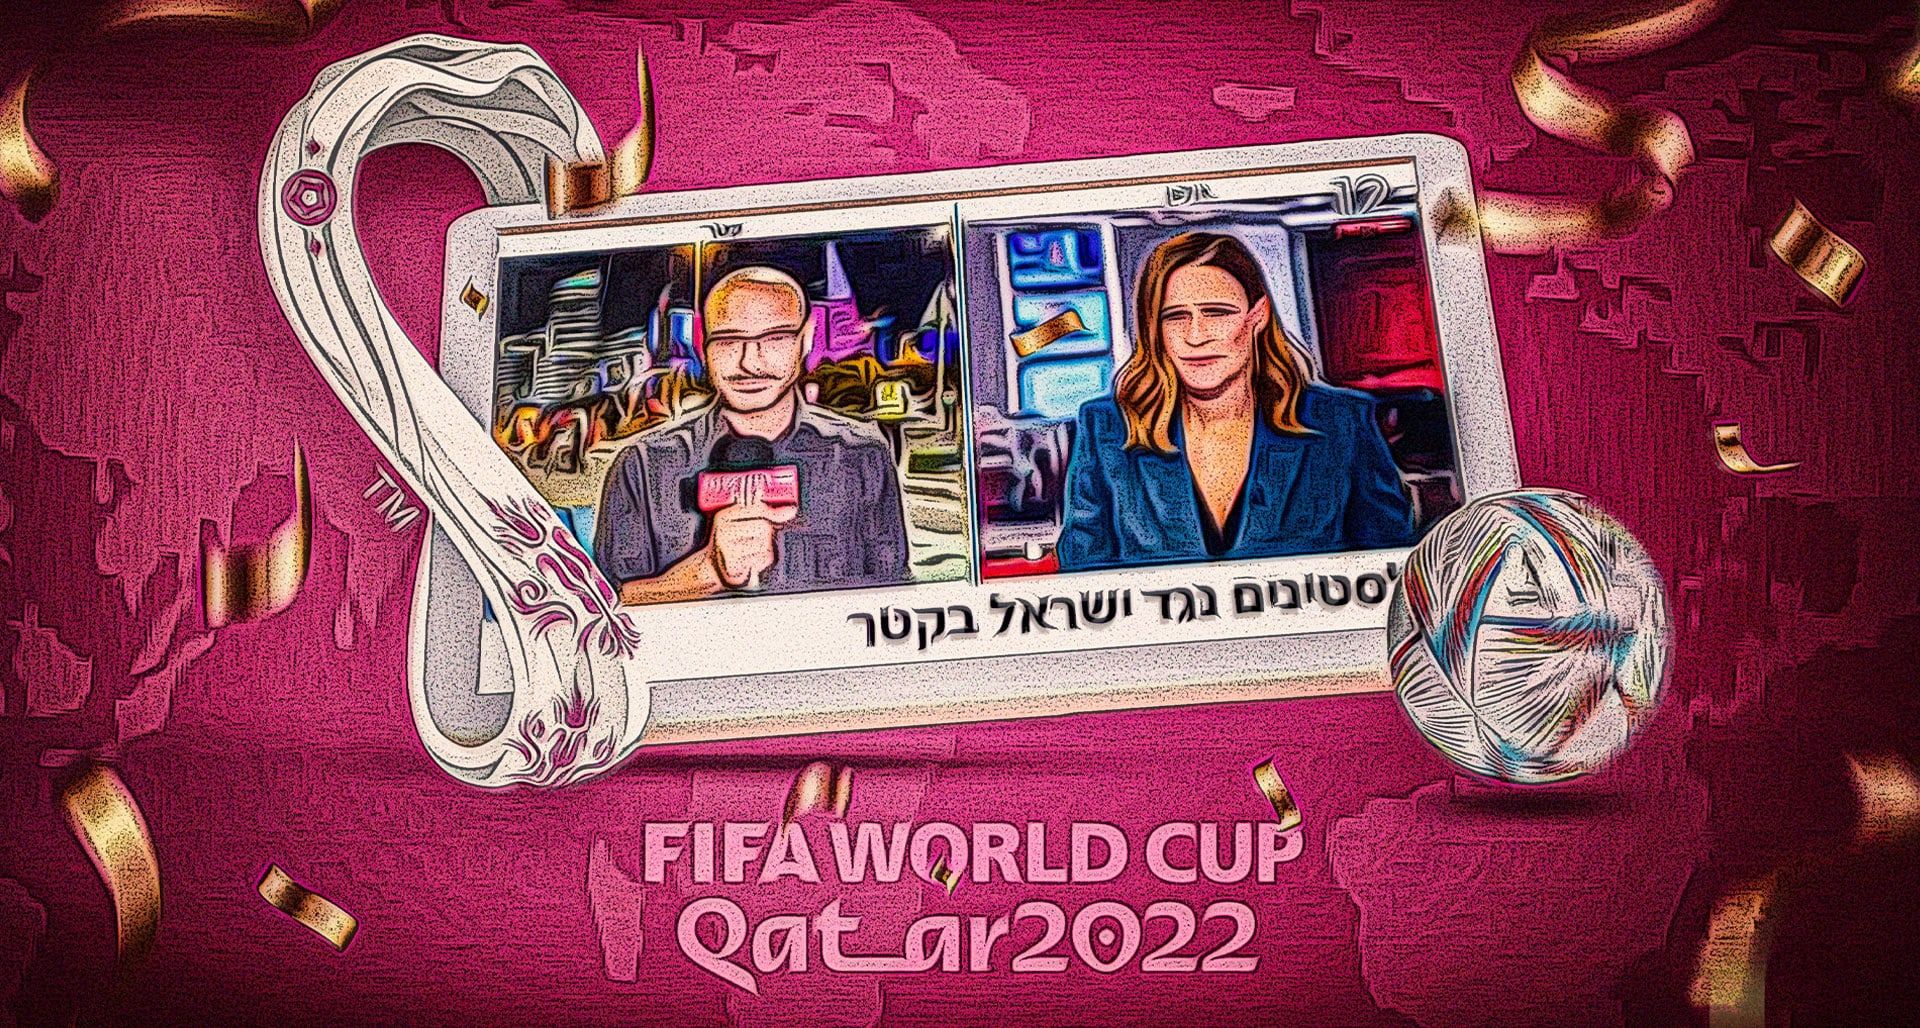 Anti-Israel campaign at the 2022 World Cup